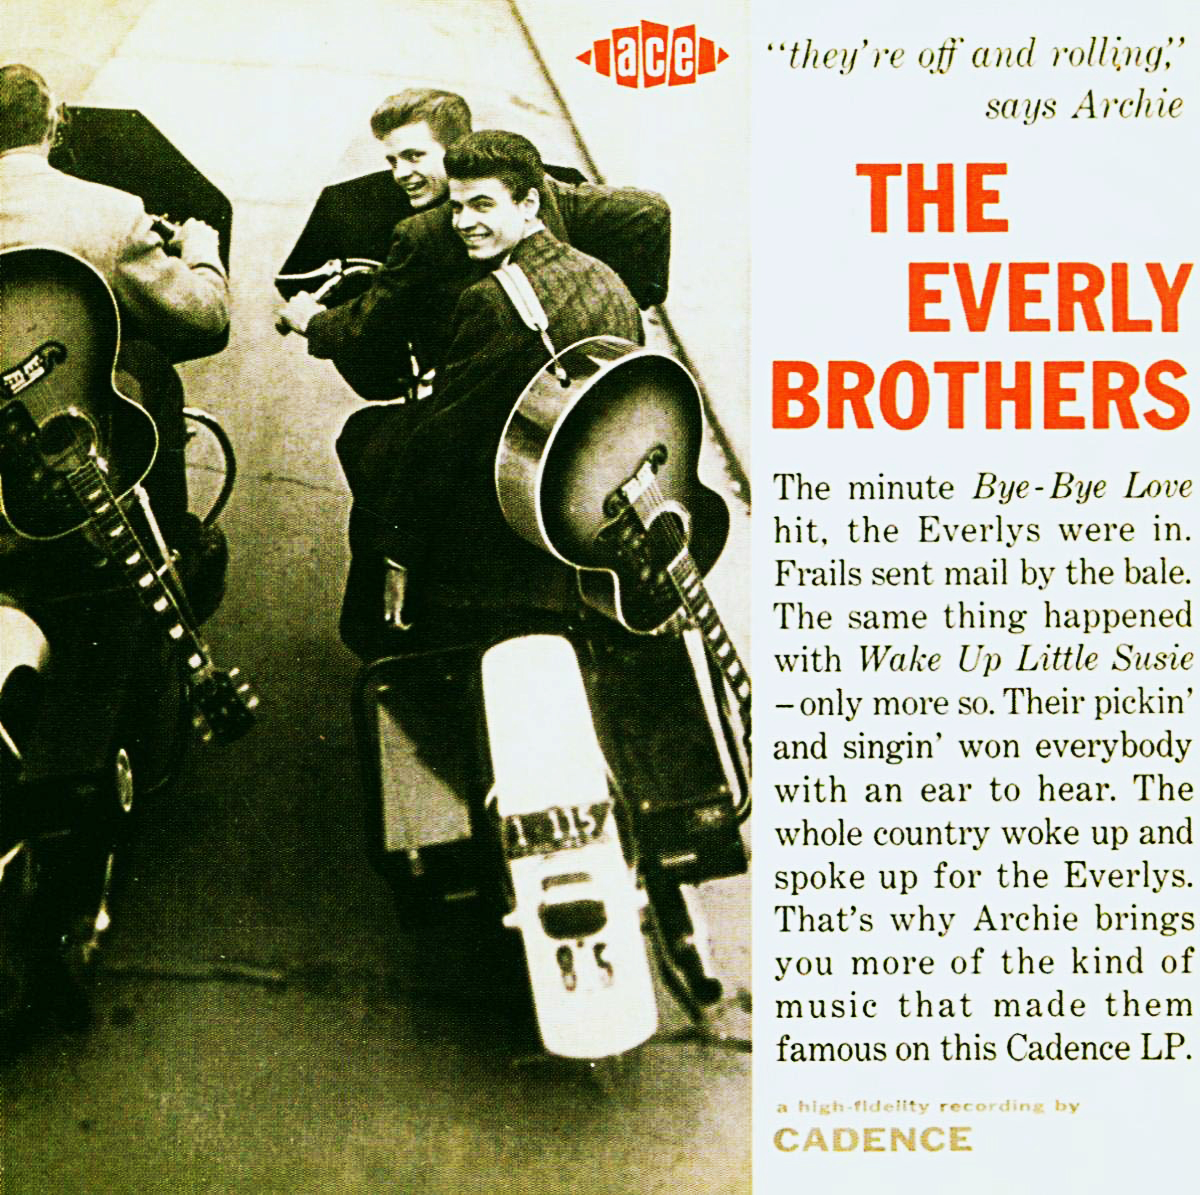 “Wake Up Little Susie” - The Everly Brothers 1957